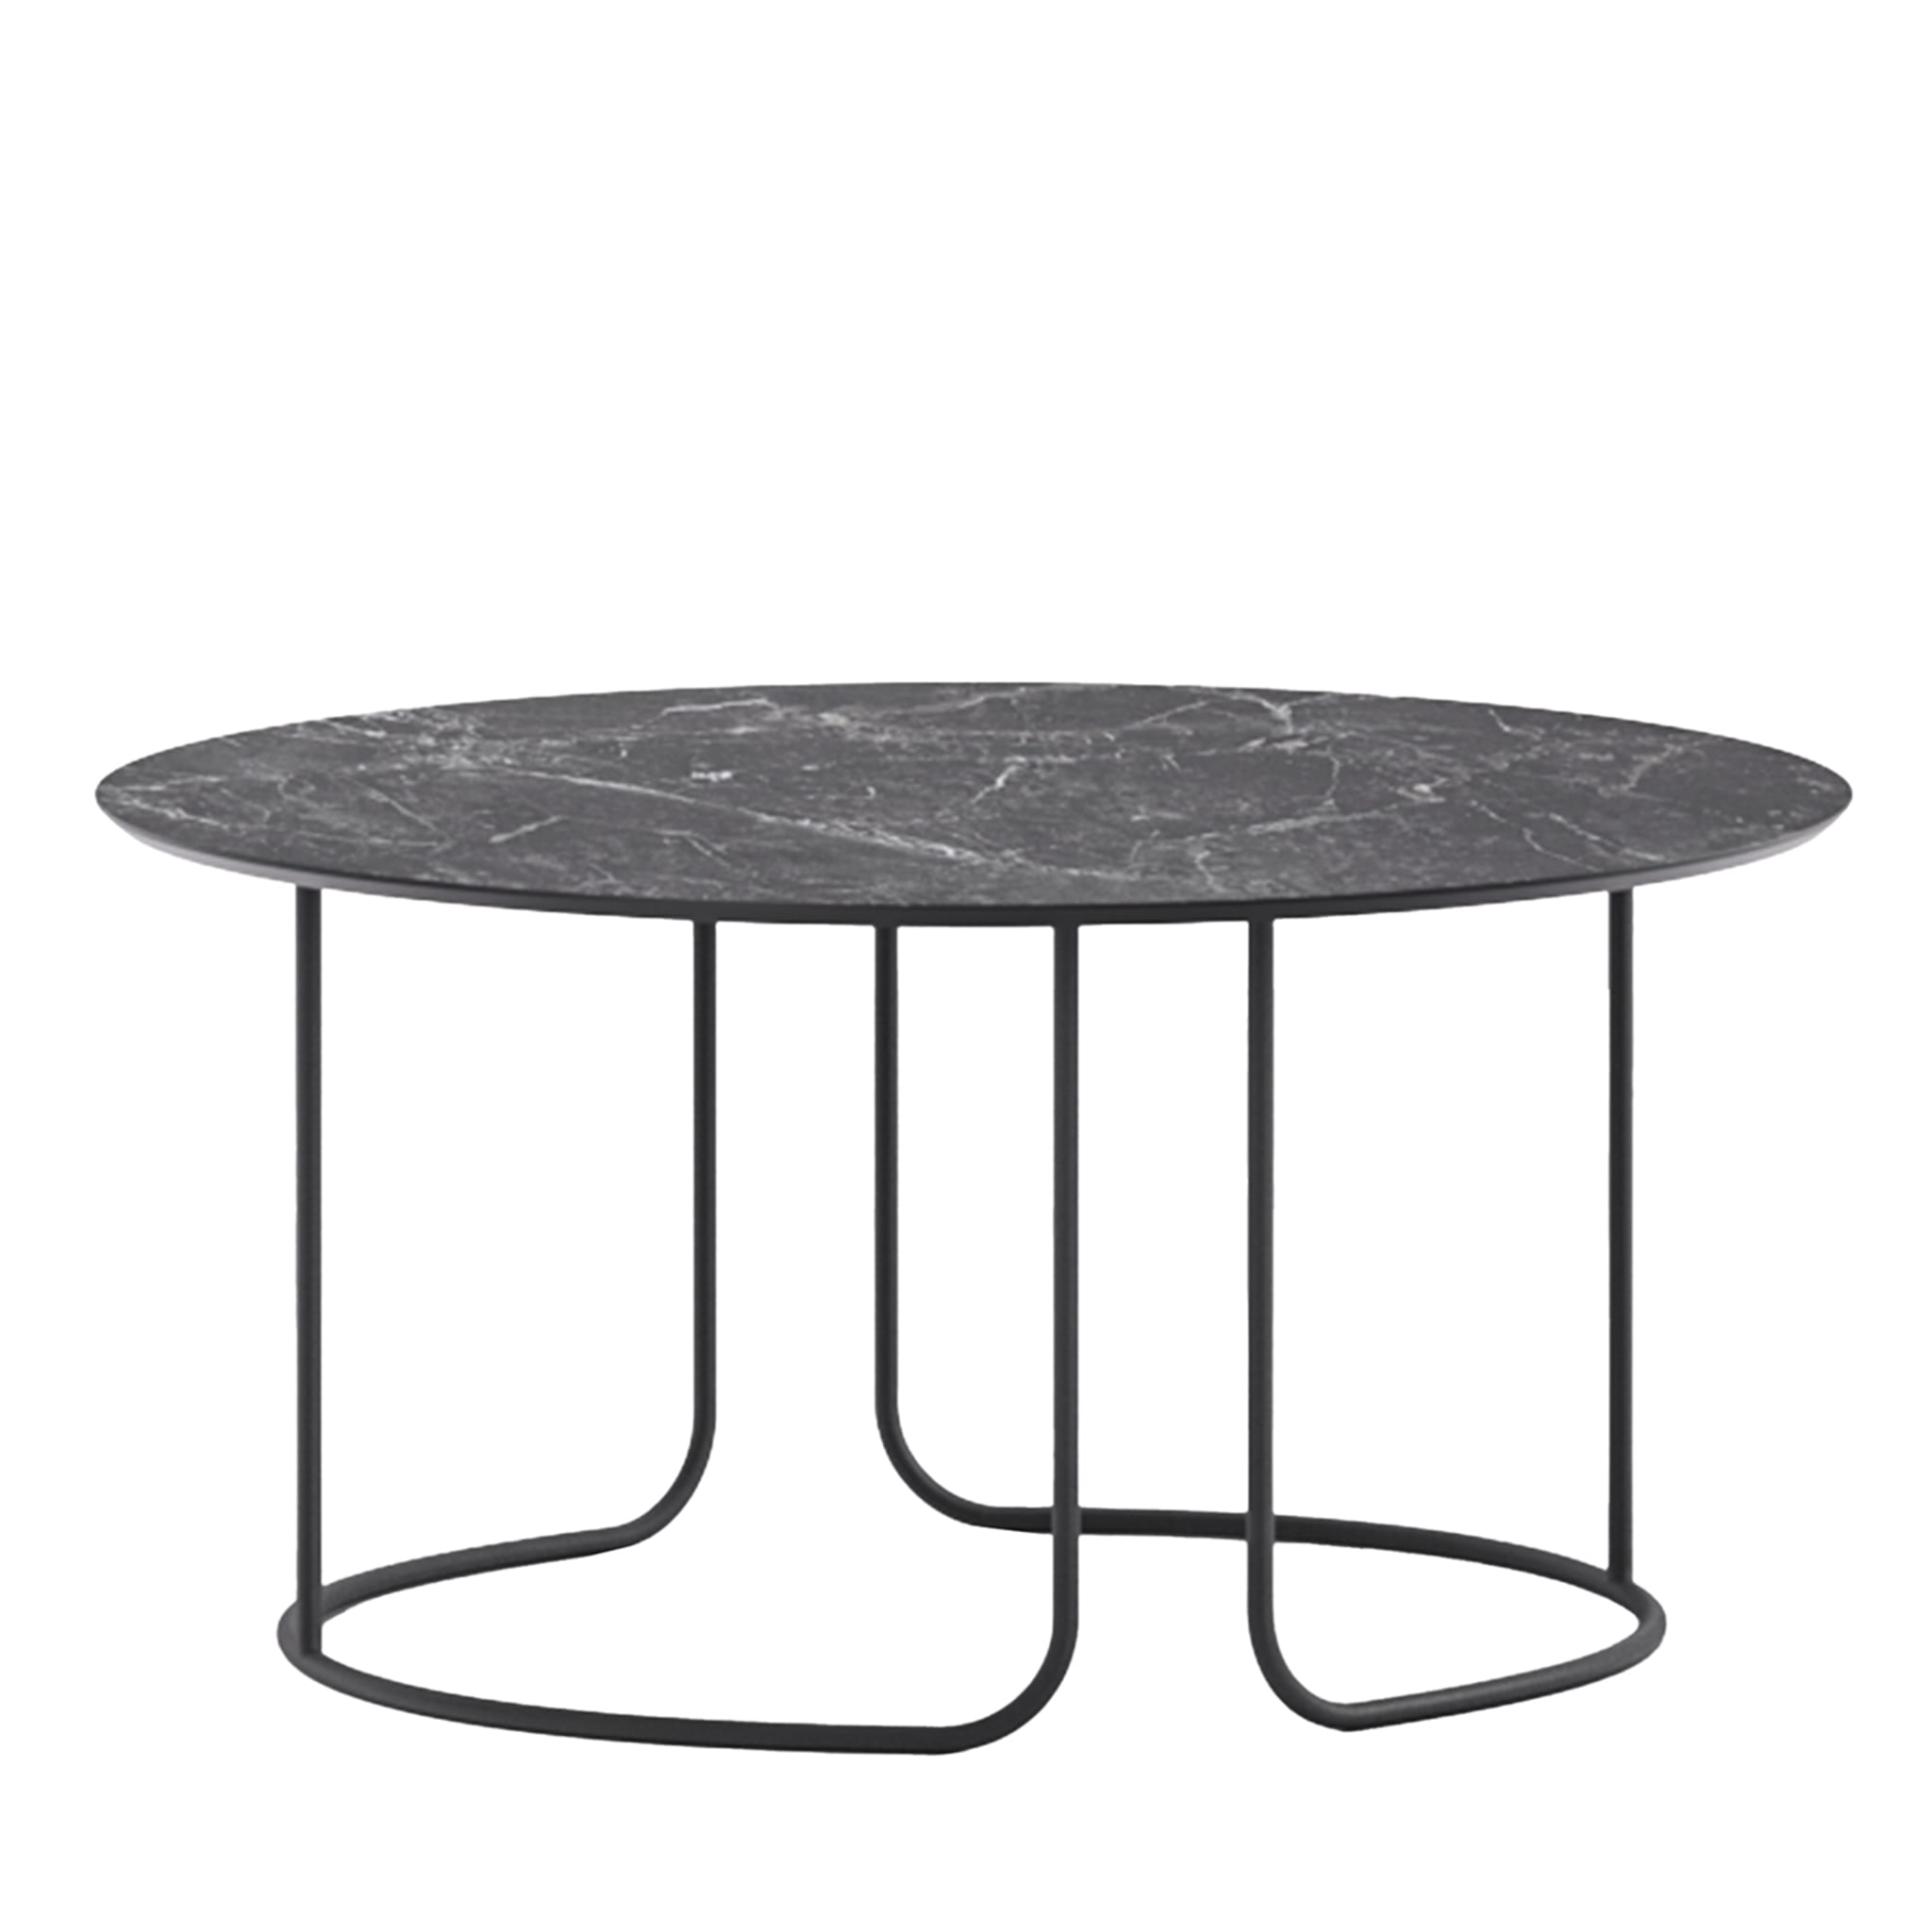 Scala Round Lava Stone & Black Coffee Table by Marco Piva - Main view